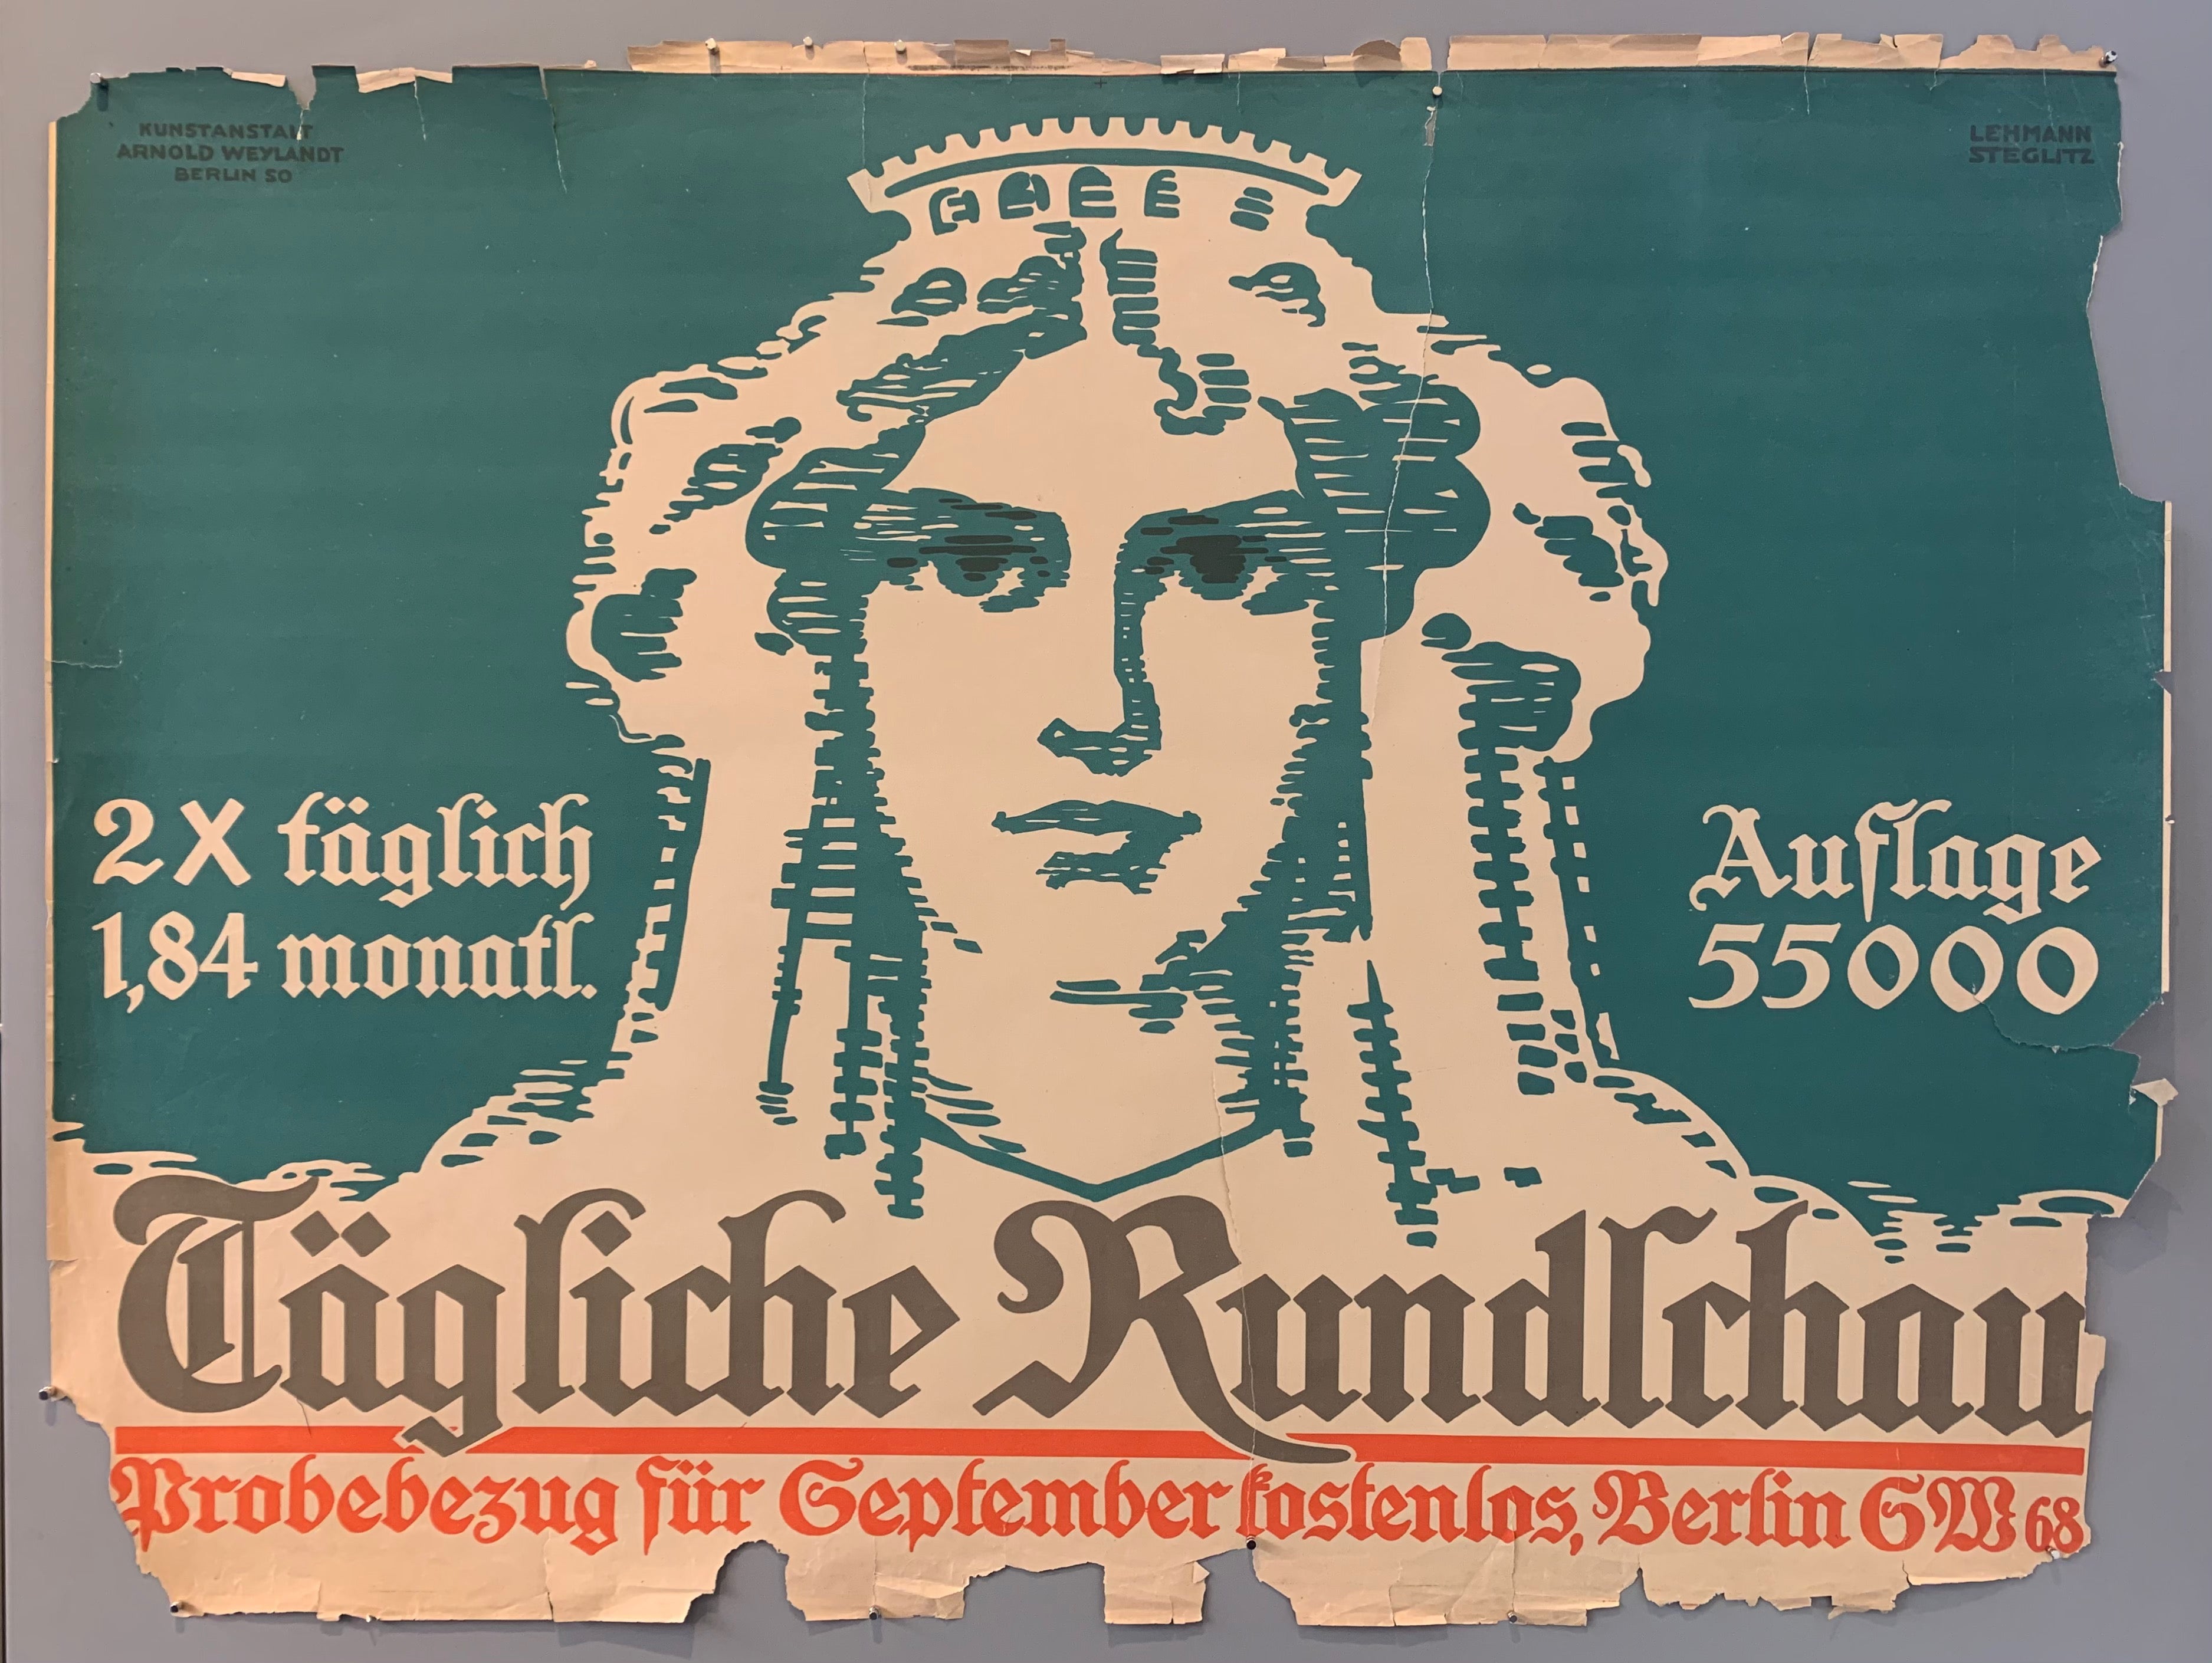 The daily Rundschau was a newspaper published from 1945 to 1955. It was published in Berlin by the Soviet army in the Soviet occupation zone. This poster advertises sample purchases in september for free, with a woman in the middle. Background is turquoise with red and white text.